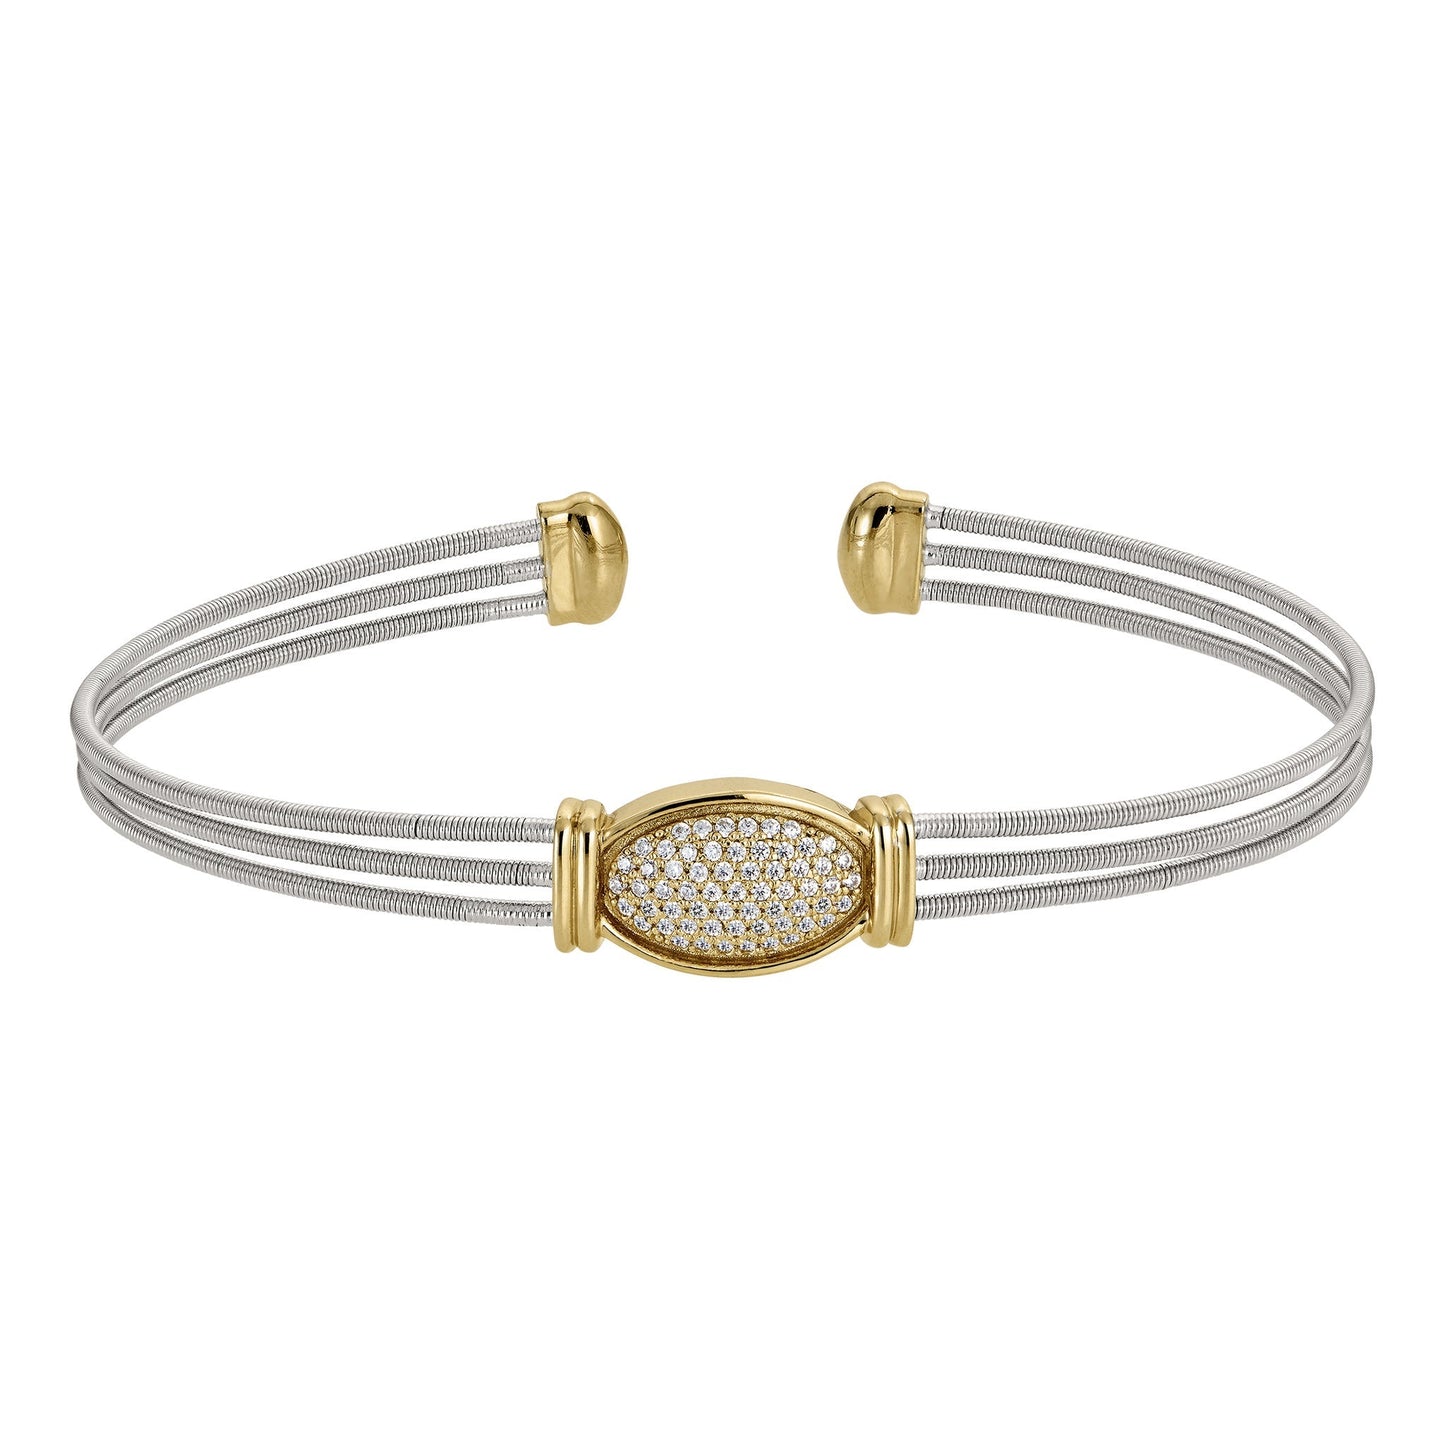 A three cable bracelet with oval gemstone accents displayed on a neutral white background.